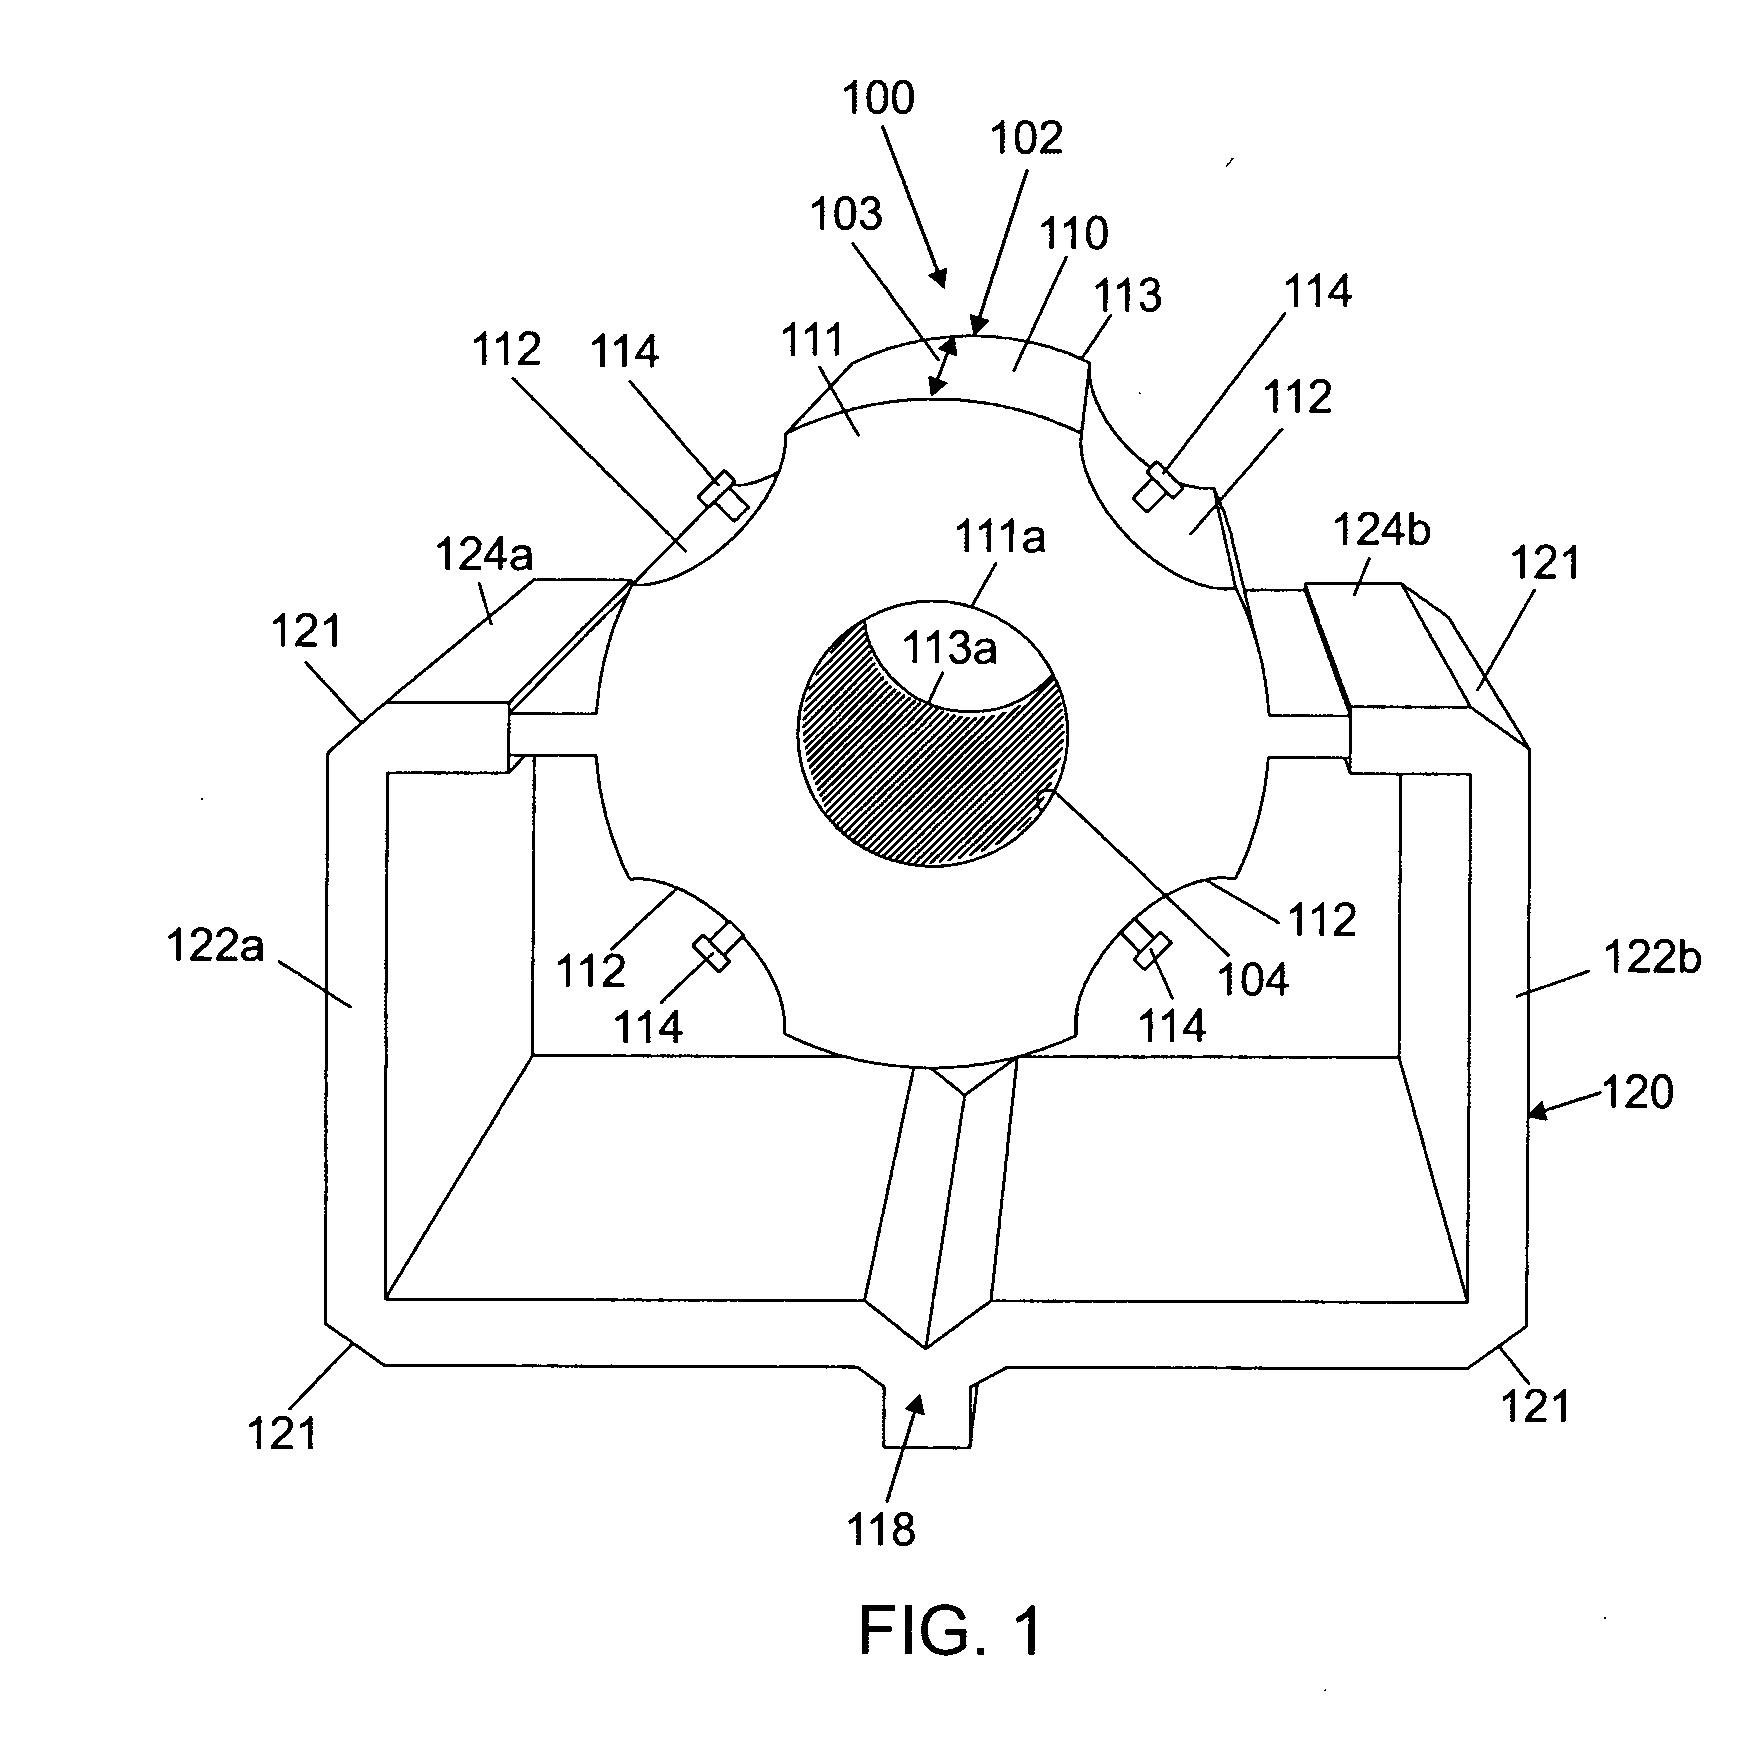 Microwave applicator, system, and method for providing generally circular heating